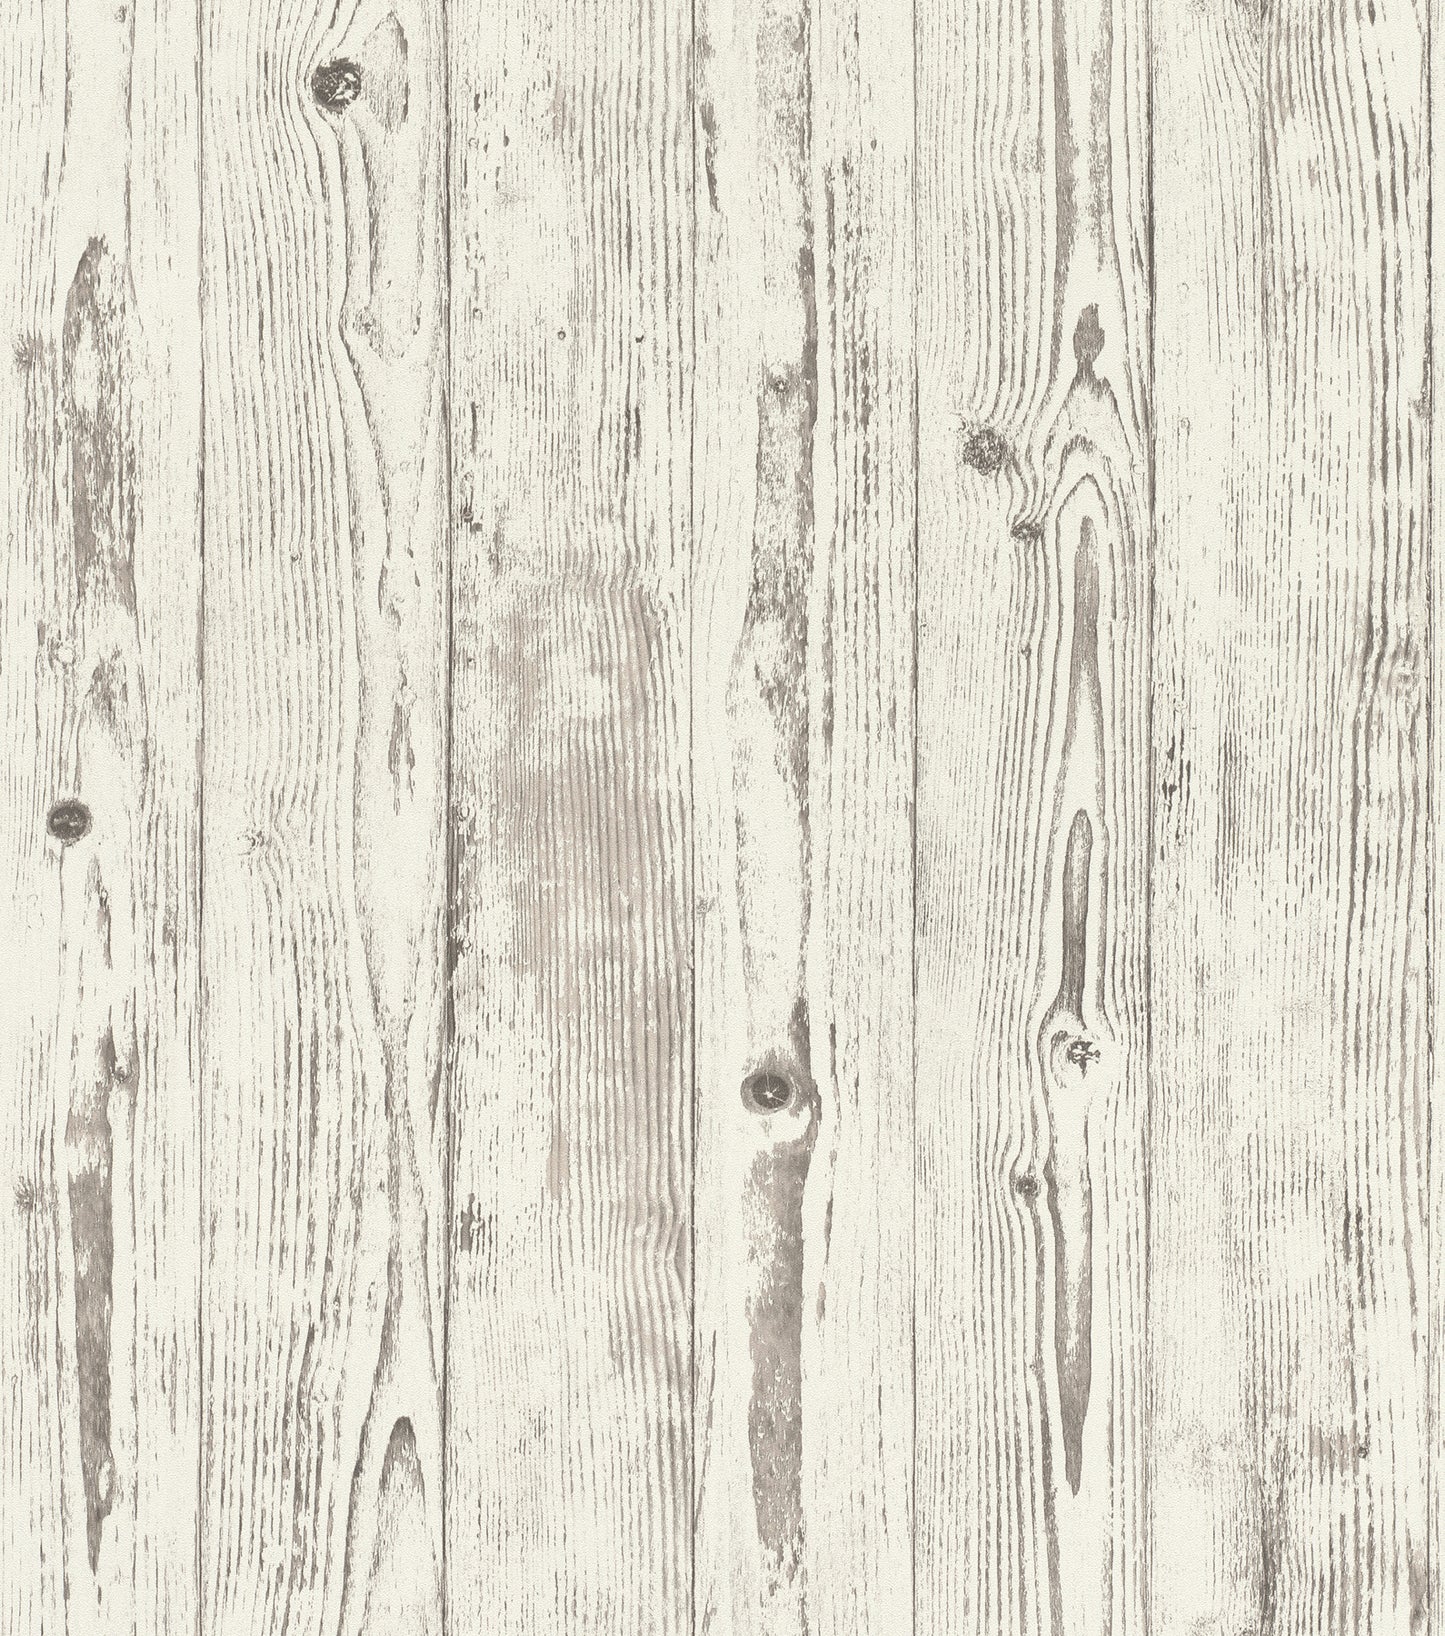 Save 4015-427301 Beyond Textures Albright White Weathered Oak Panels White by Advantage